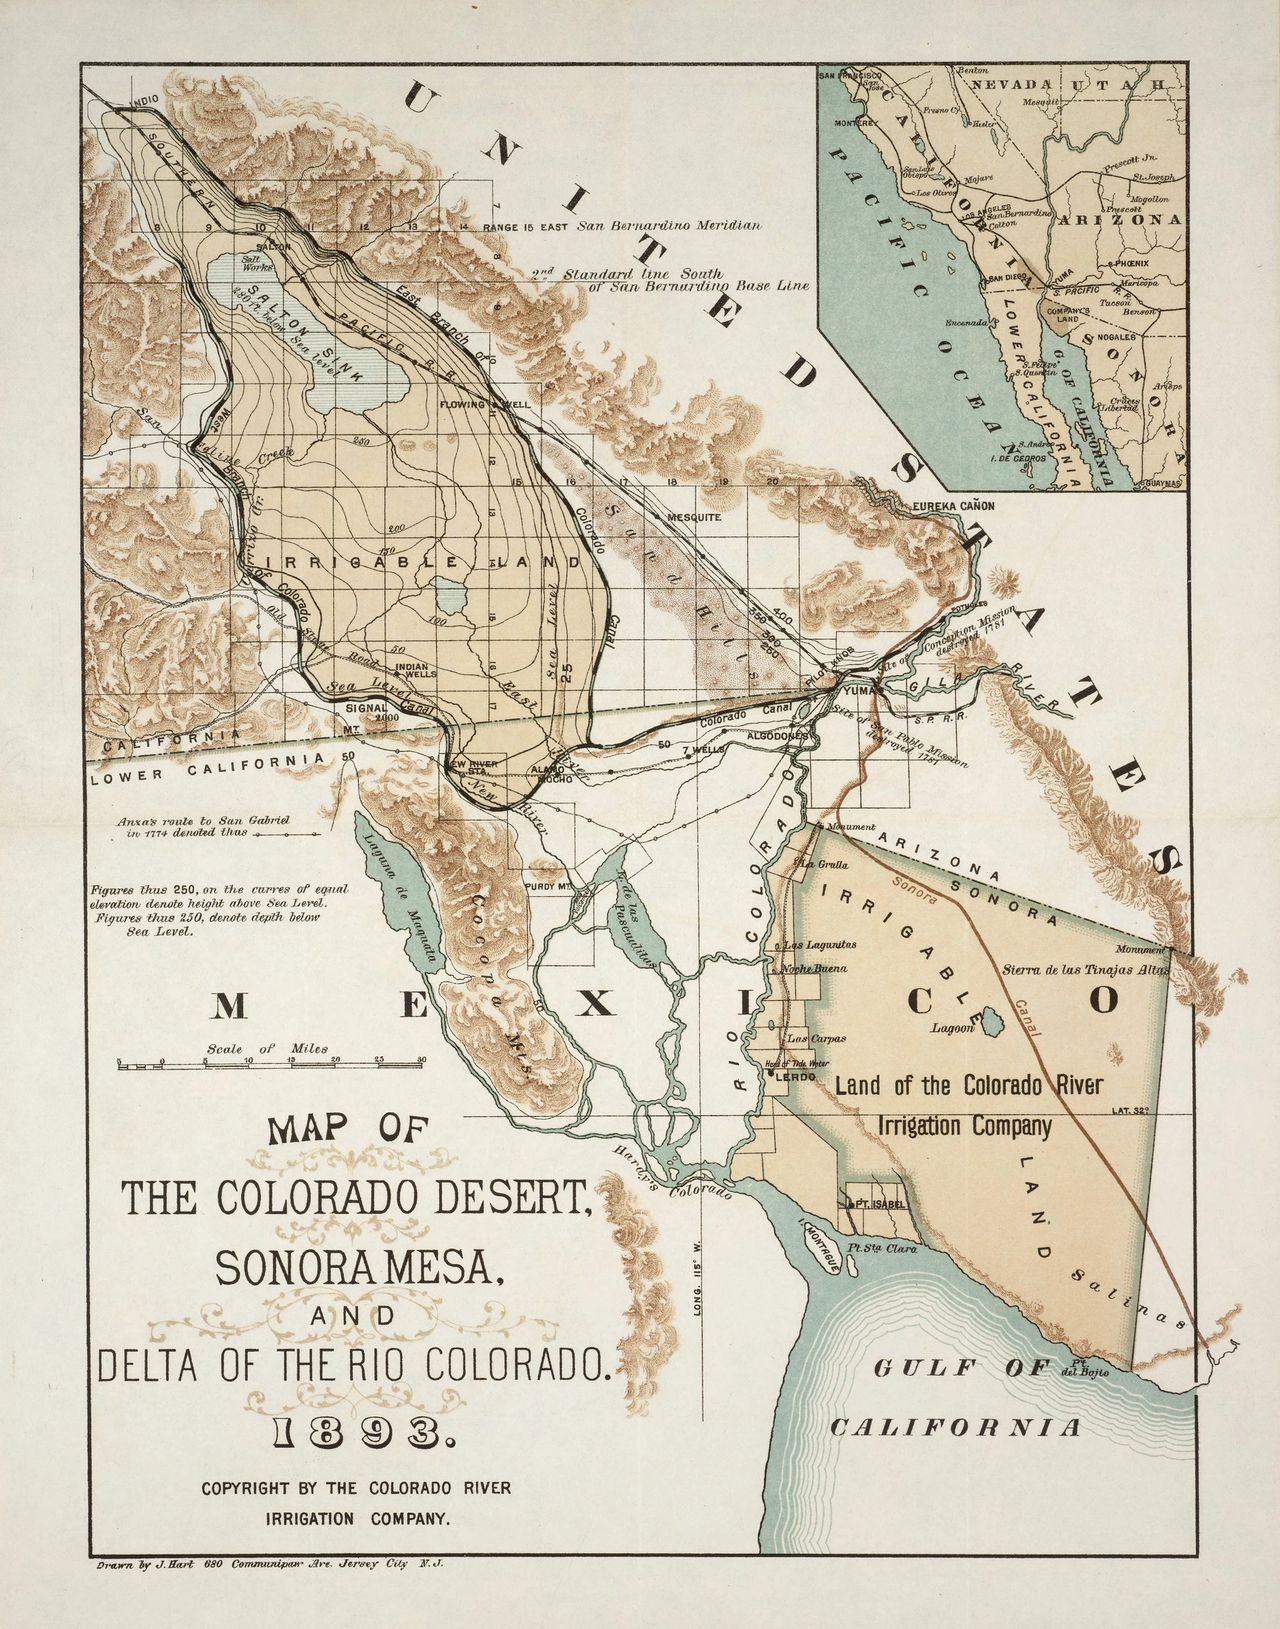 The Colorado River Delta as it appeared in 1893 when strange ruins were said to have been discovered there.